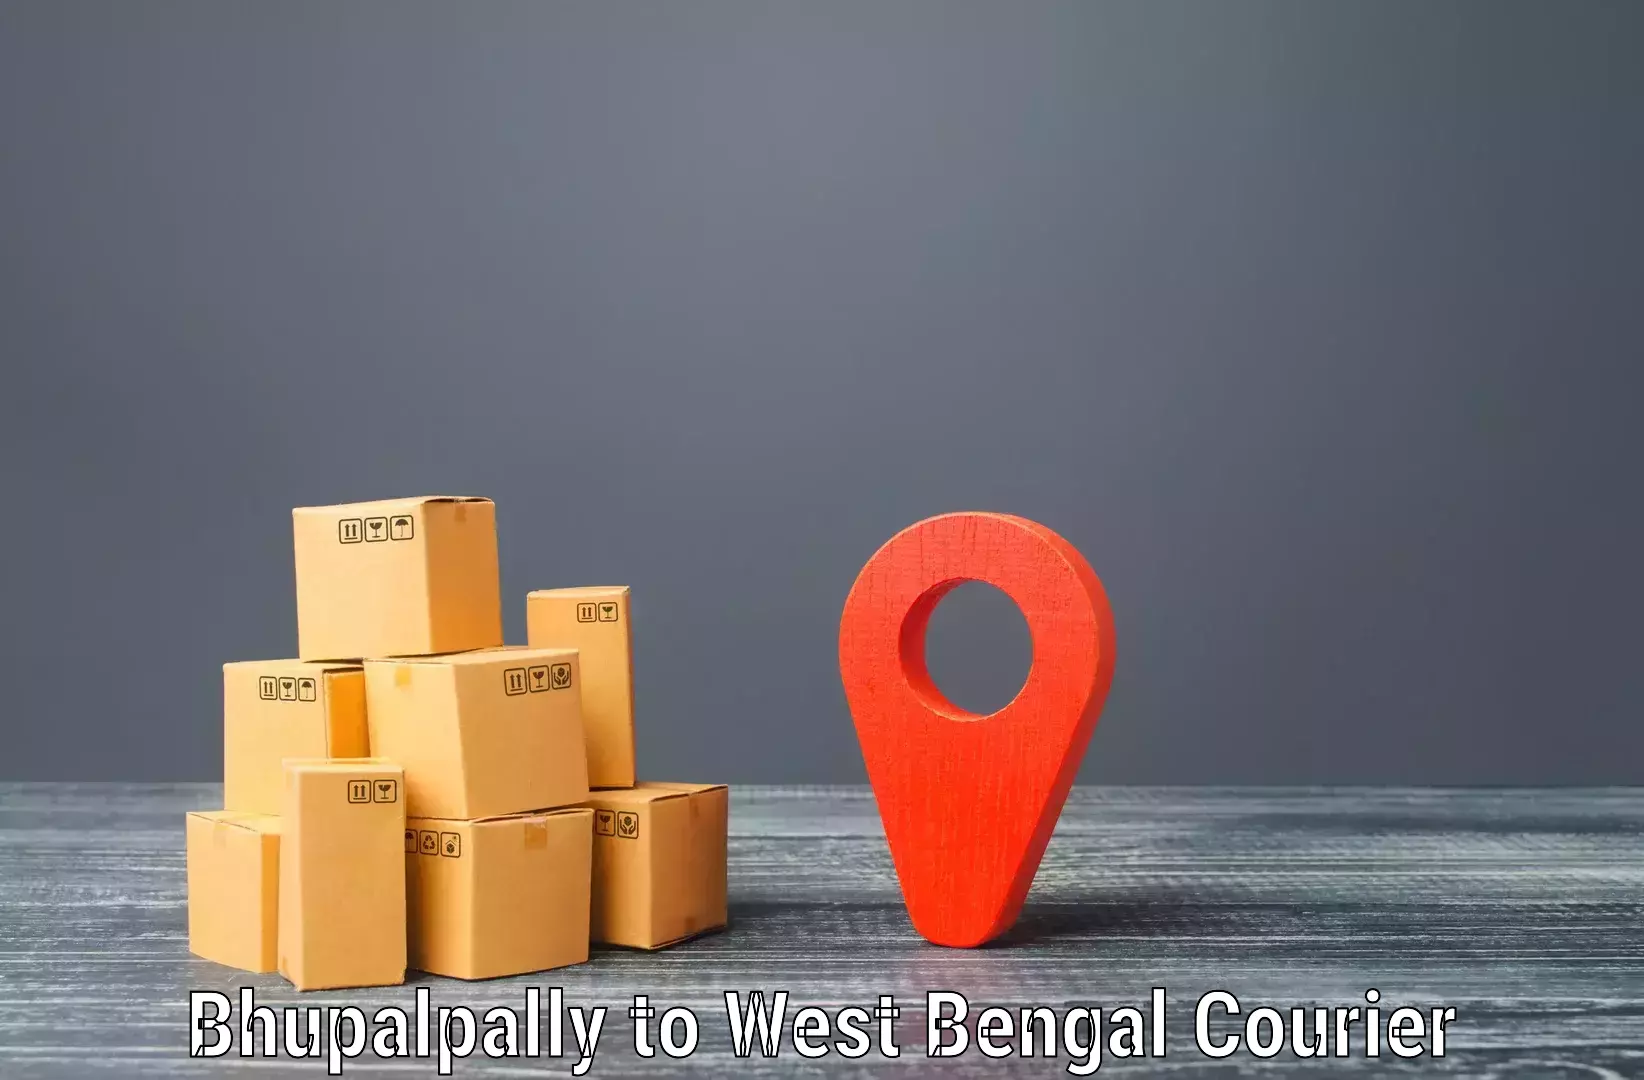 Efficient order fulfillment Bhupalpally to Budge Budge